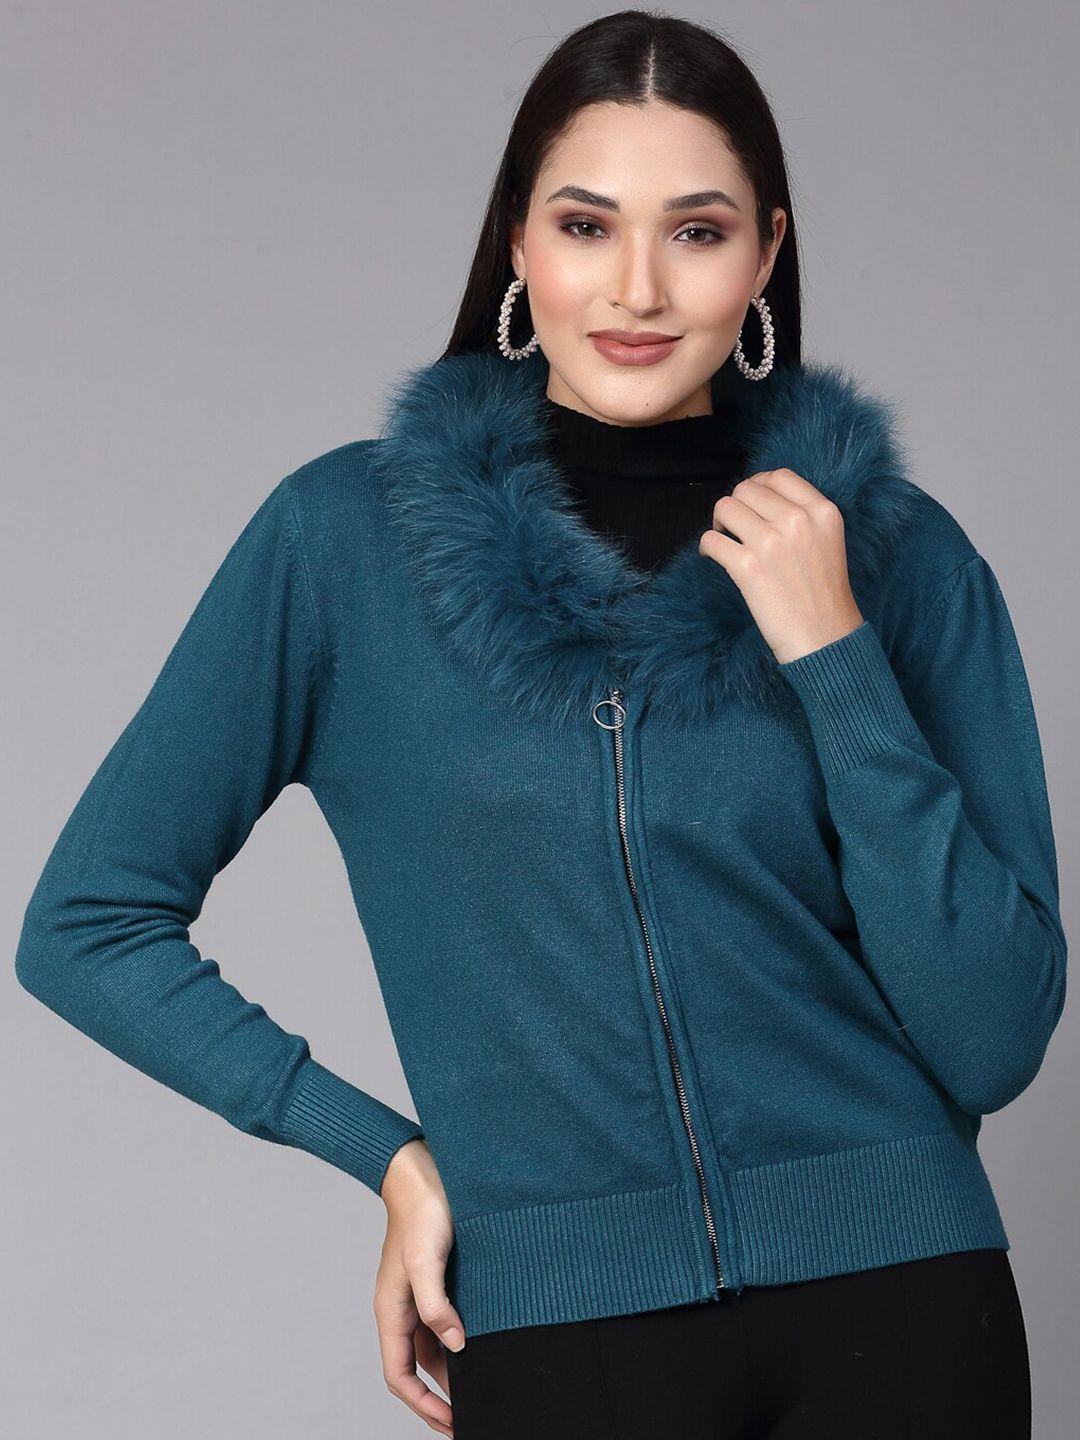 mafadeny long sleeves front-open sweater with faux fur